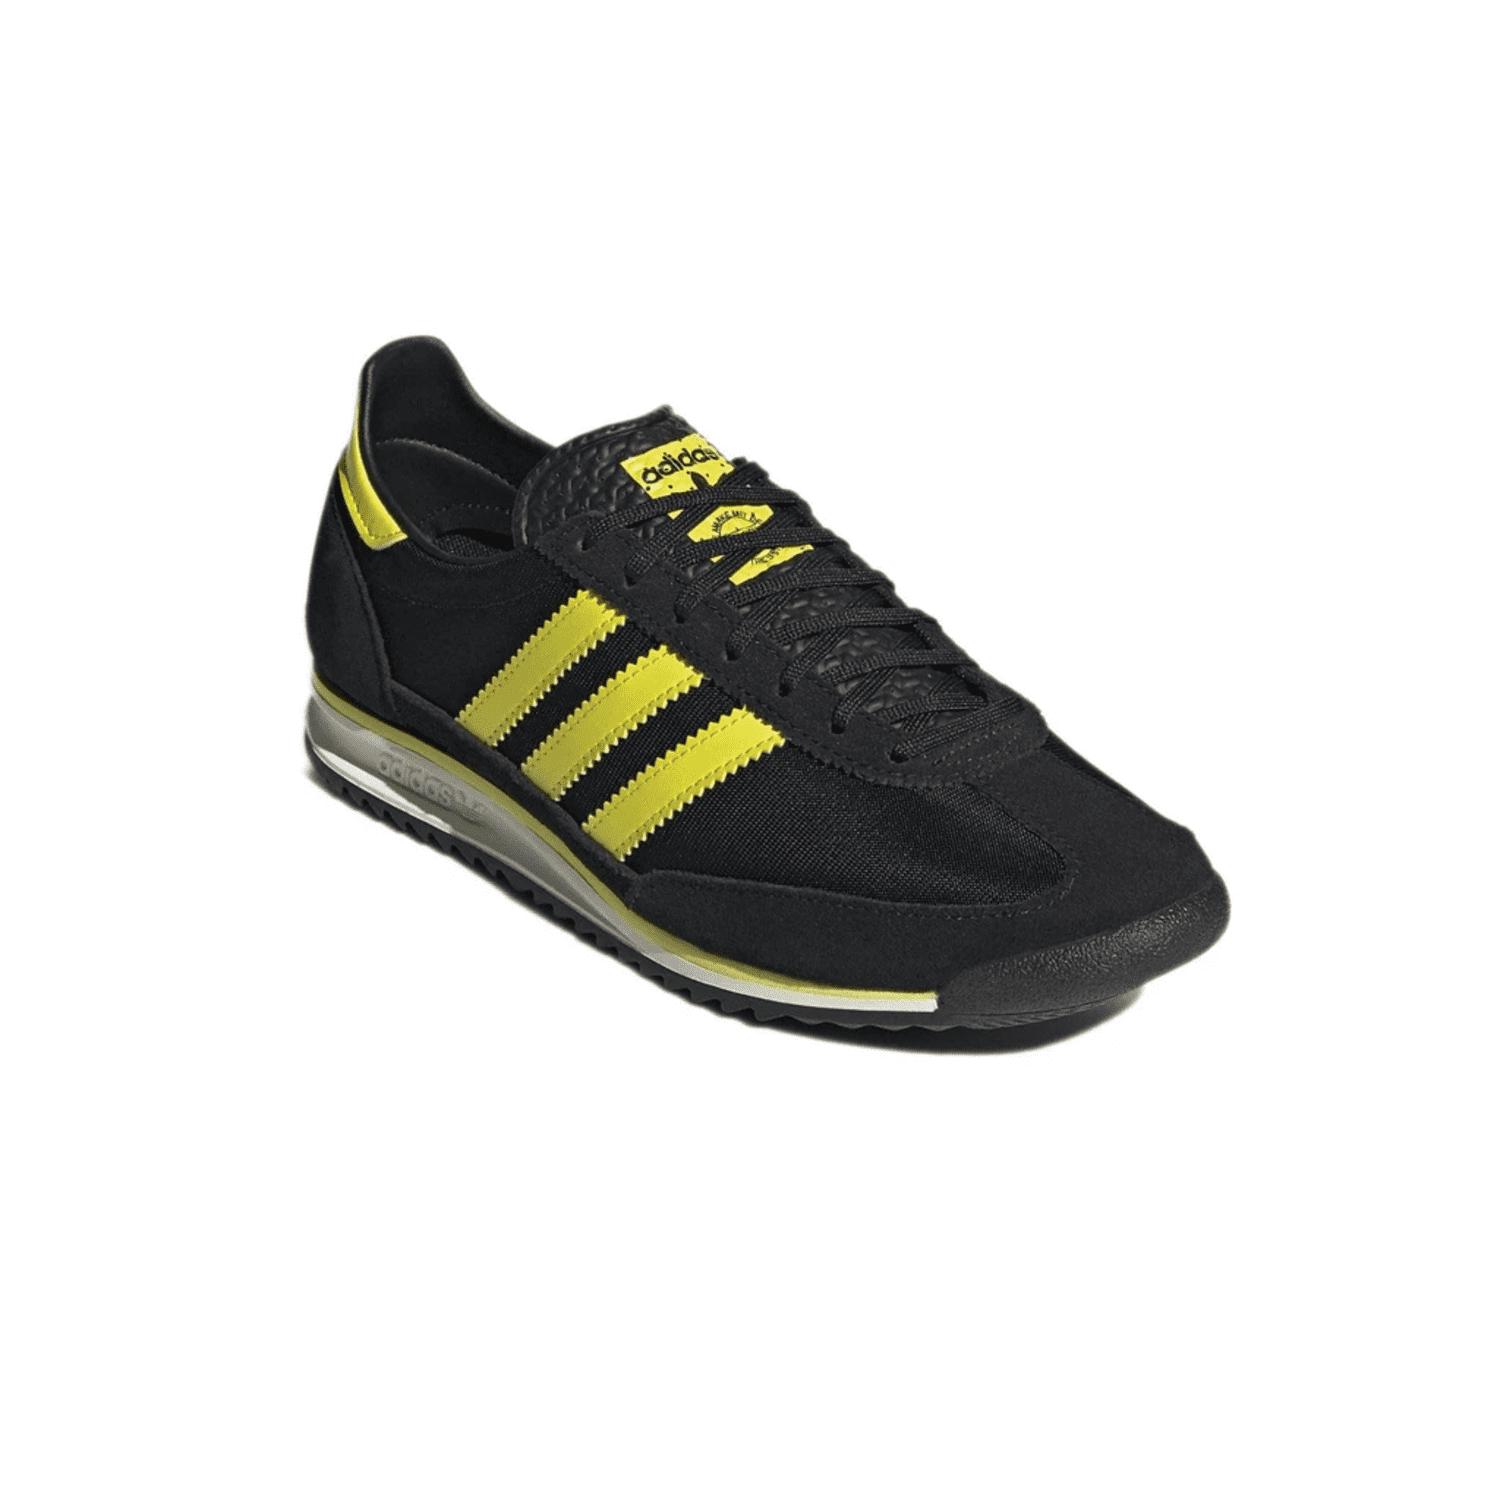 adidas Synthetic Sl 72 Og Black, Acid Yellow & White Shoes for Men - Lyst